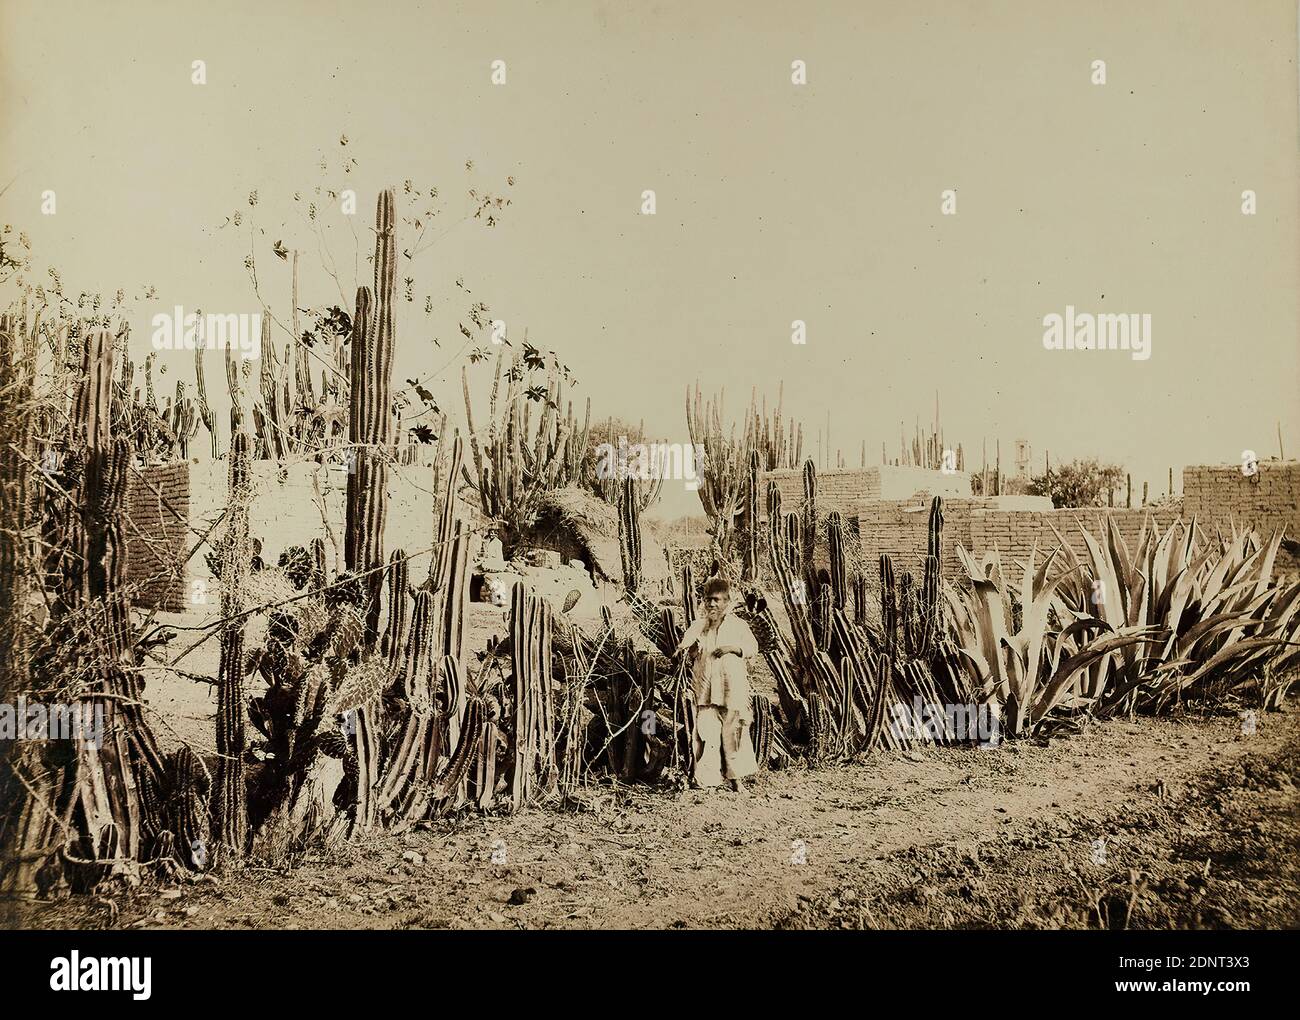 William Henry Jackson, Cactus Fence in Salamanca, Mexico, albumin paper, black and white positive process, image size: height: 25.60 cm; width: 34.20 cm, inscribed: recto and: exposed: No. 226. Cactus Fence in Salamanca, Mexico. W. H. Jackson & Co, Phot, Denver, Colo, in lead: v. Hesse - Wartegg, Geographische Gesellschaft, in Hamburg, Library, travel photography, landscape with plants, exotic landscapes (non-tempered zone), trees, shrubs Stock Photo